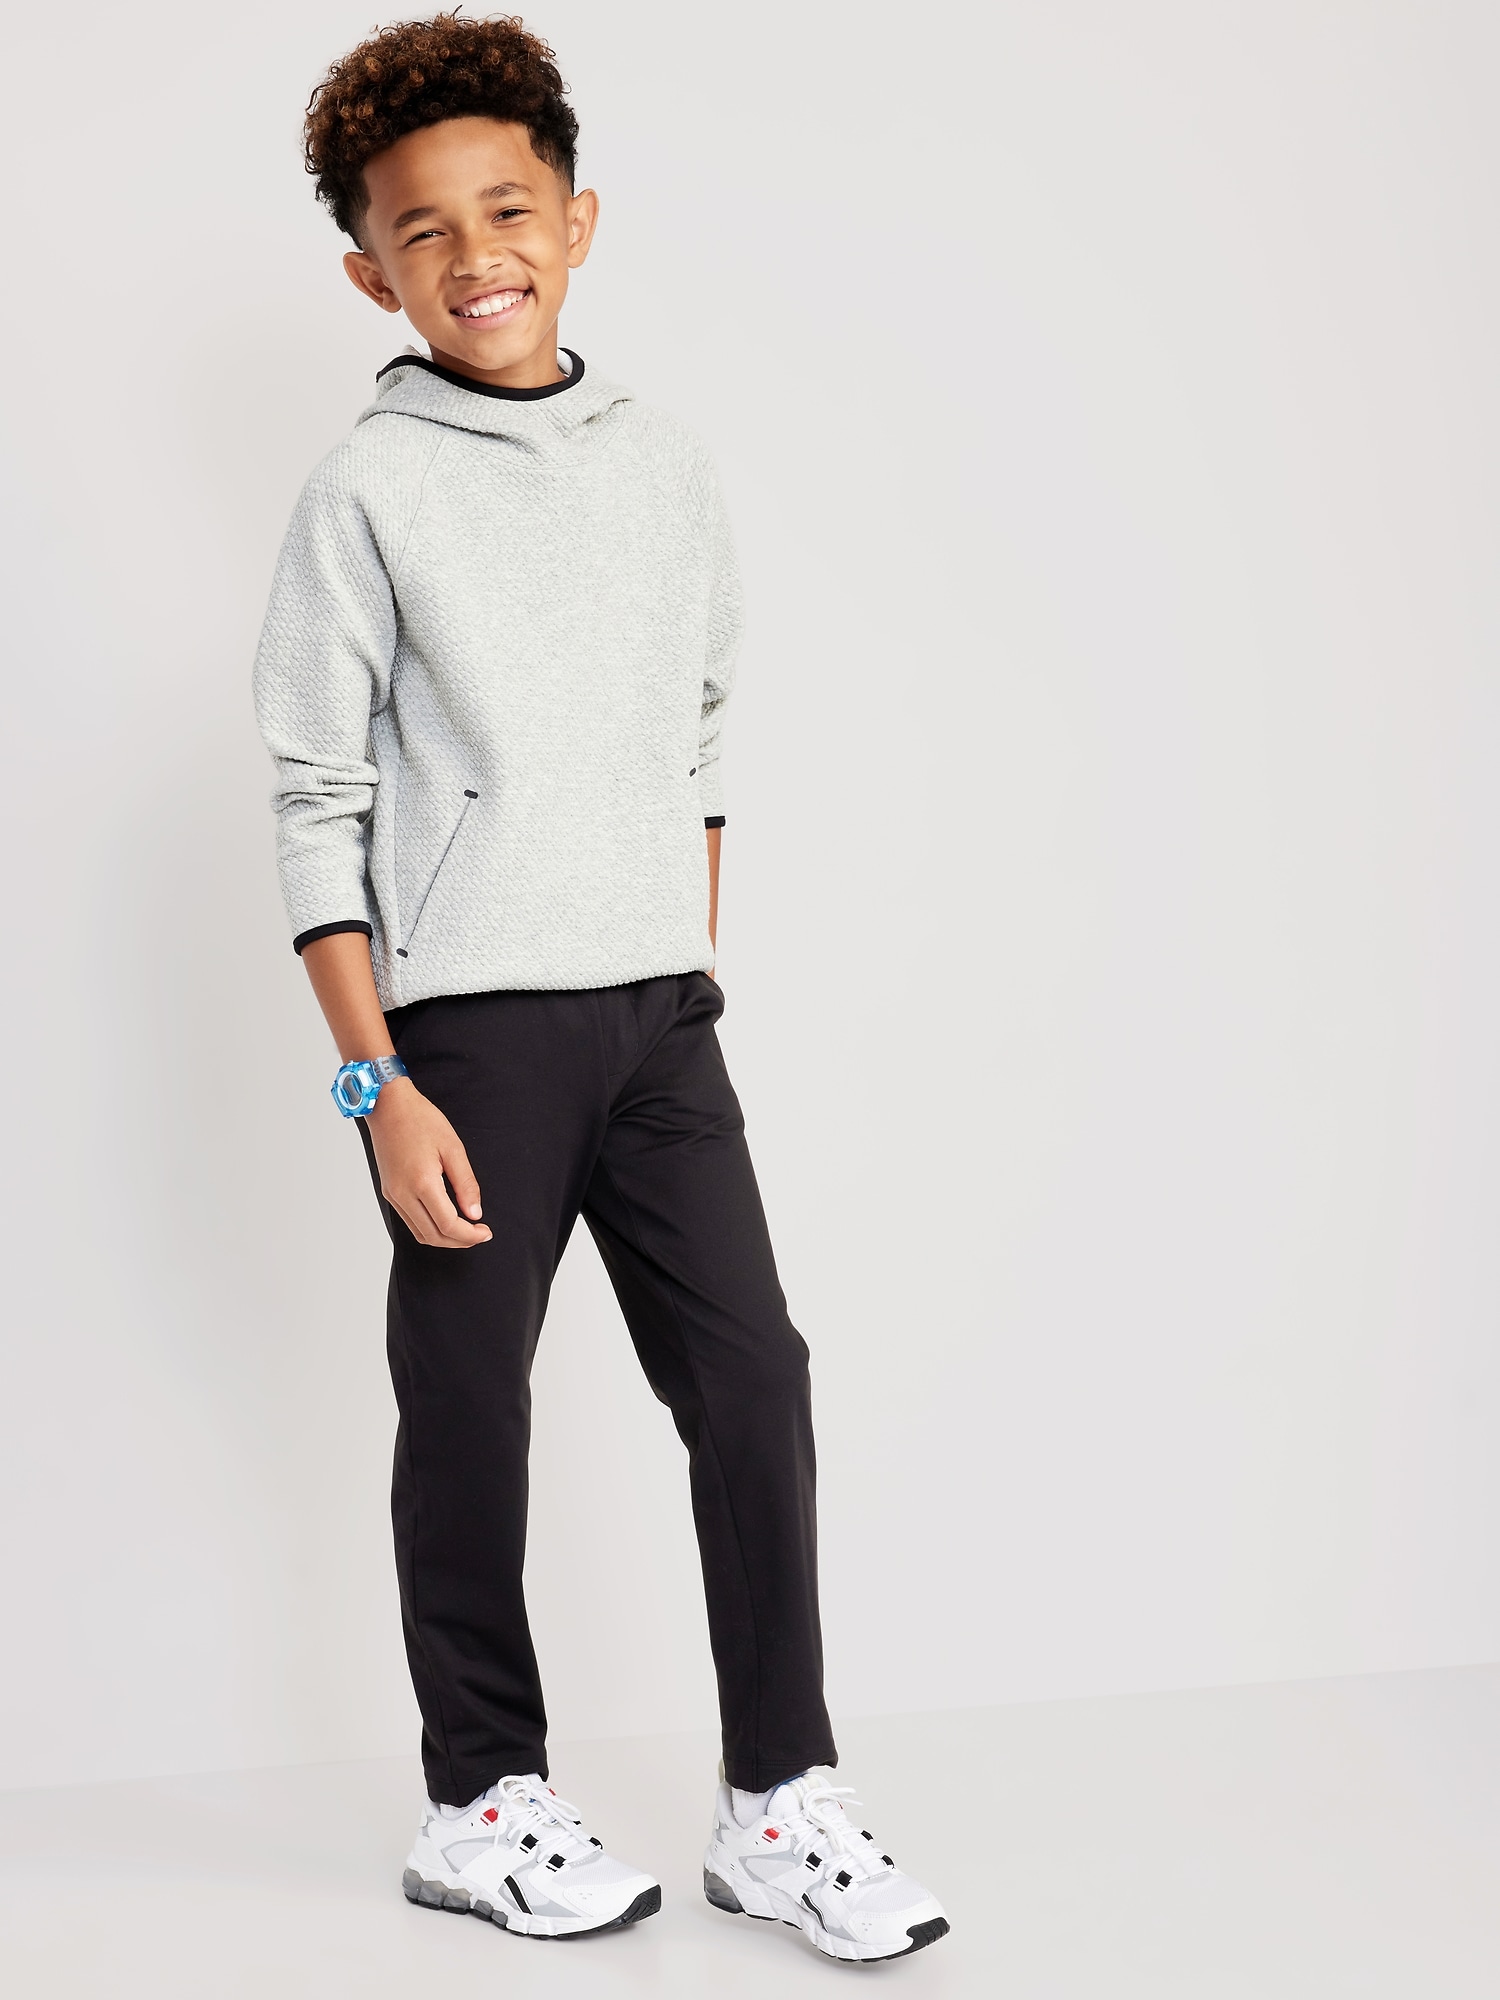 CozeCore Tapered Sweatpants for Boys | Old Navy